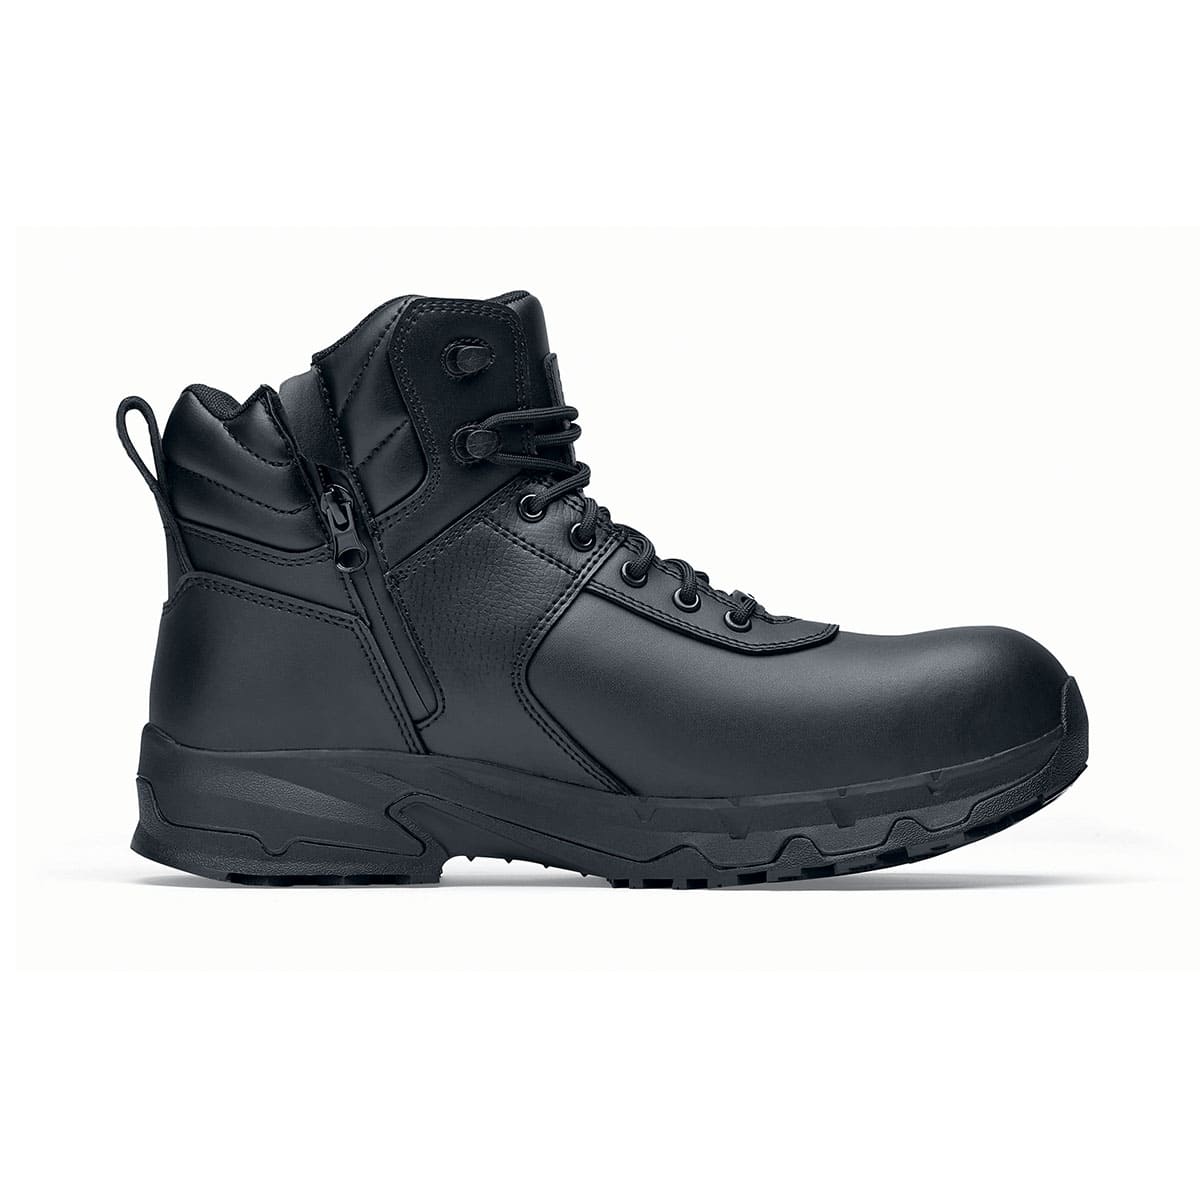 The Guard Mid from Shoes For Crews are waterproof slip-resistant safety boots with a safety toe cap, seen from the right.